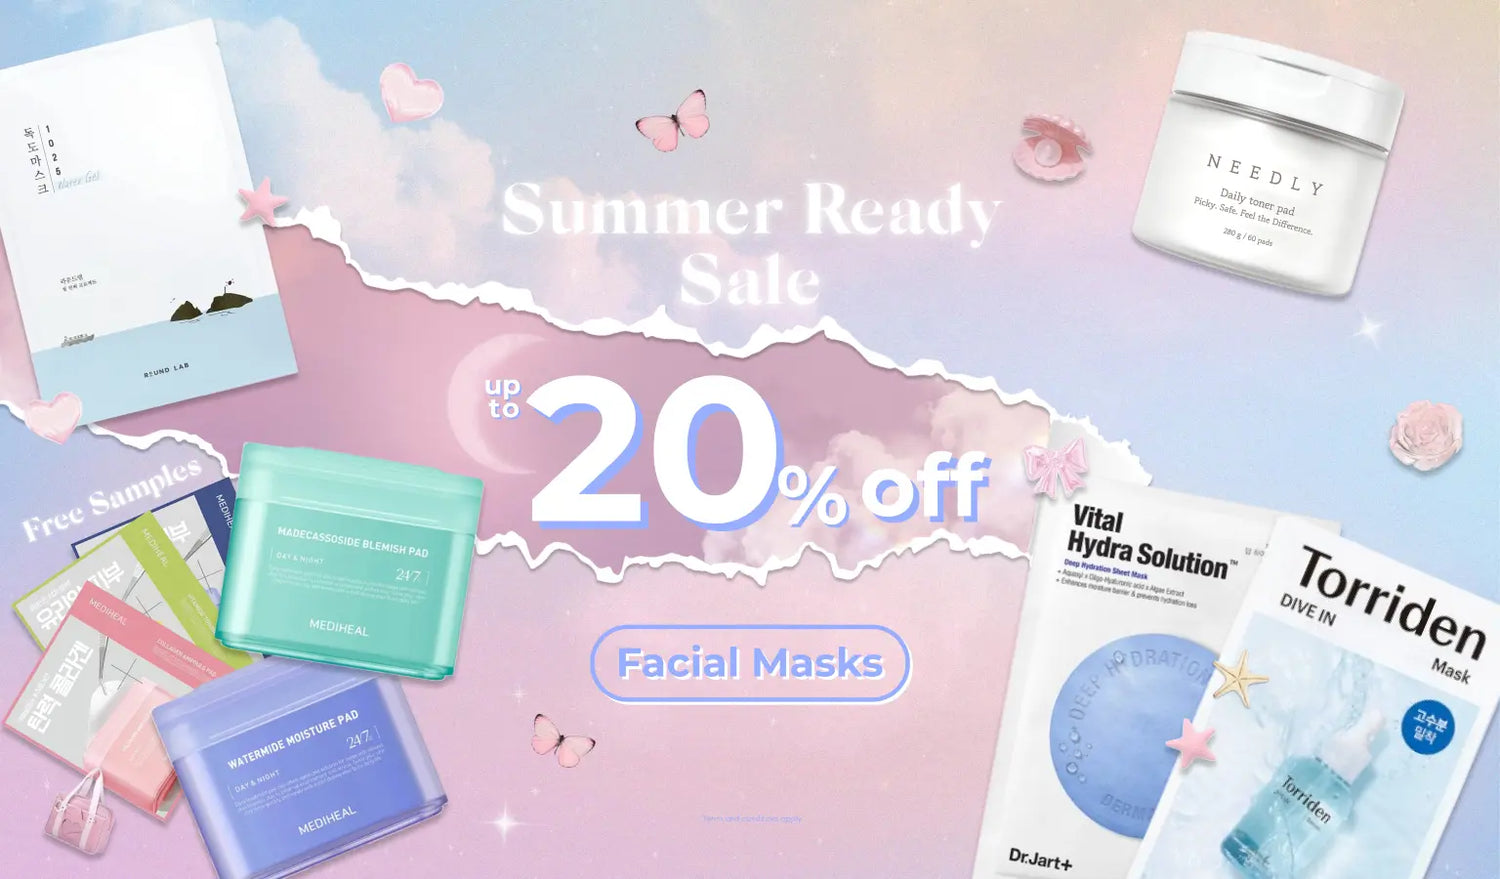 Summer Ready Sale 20%off mask